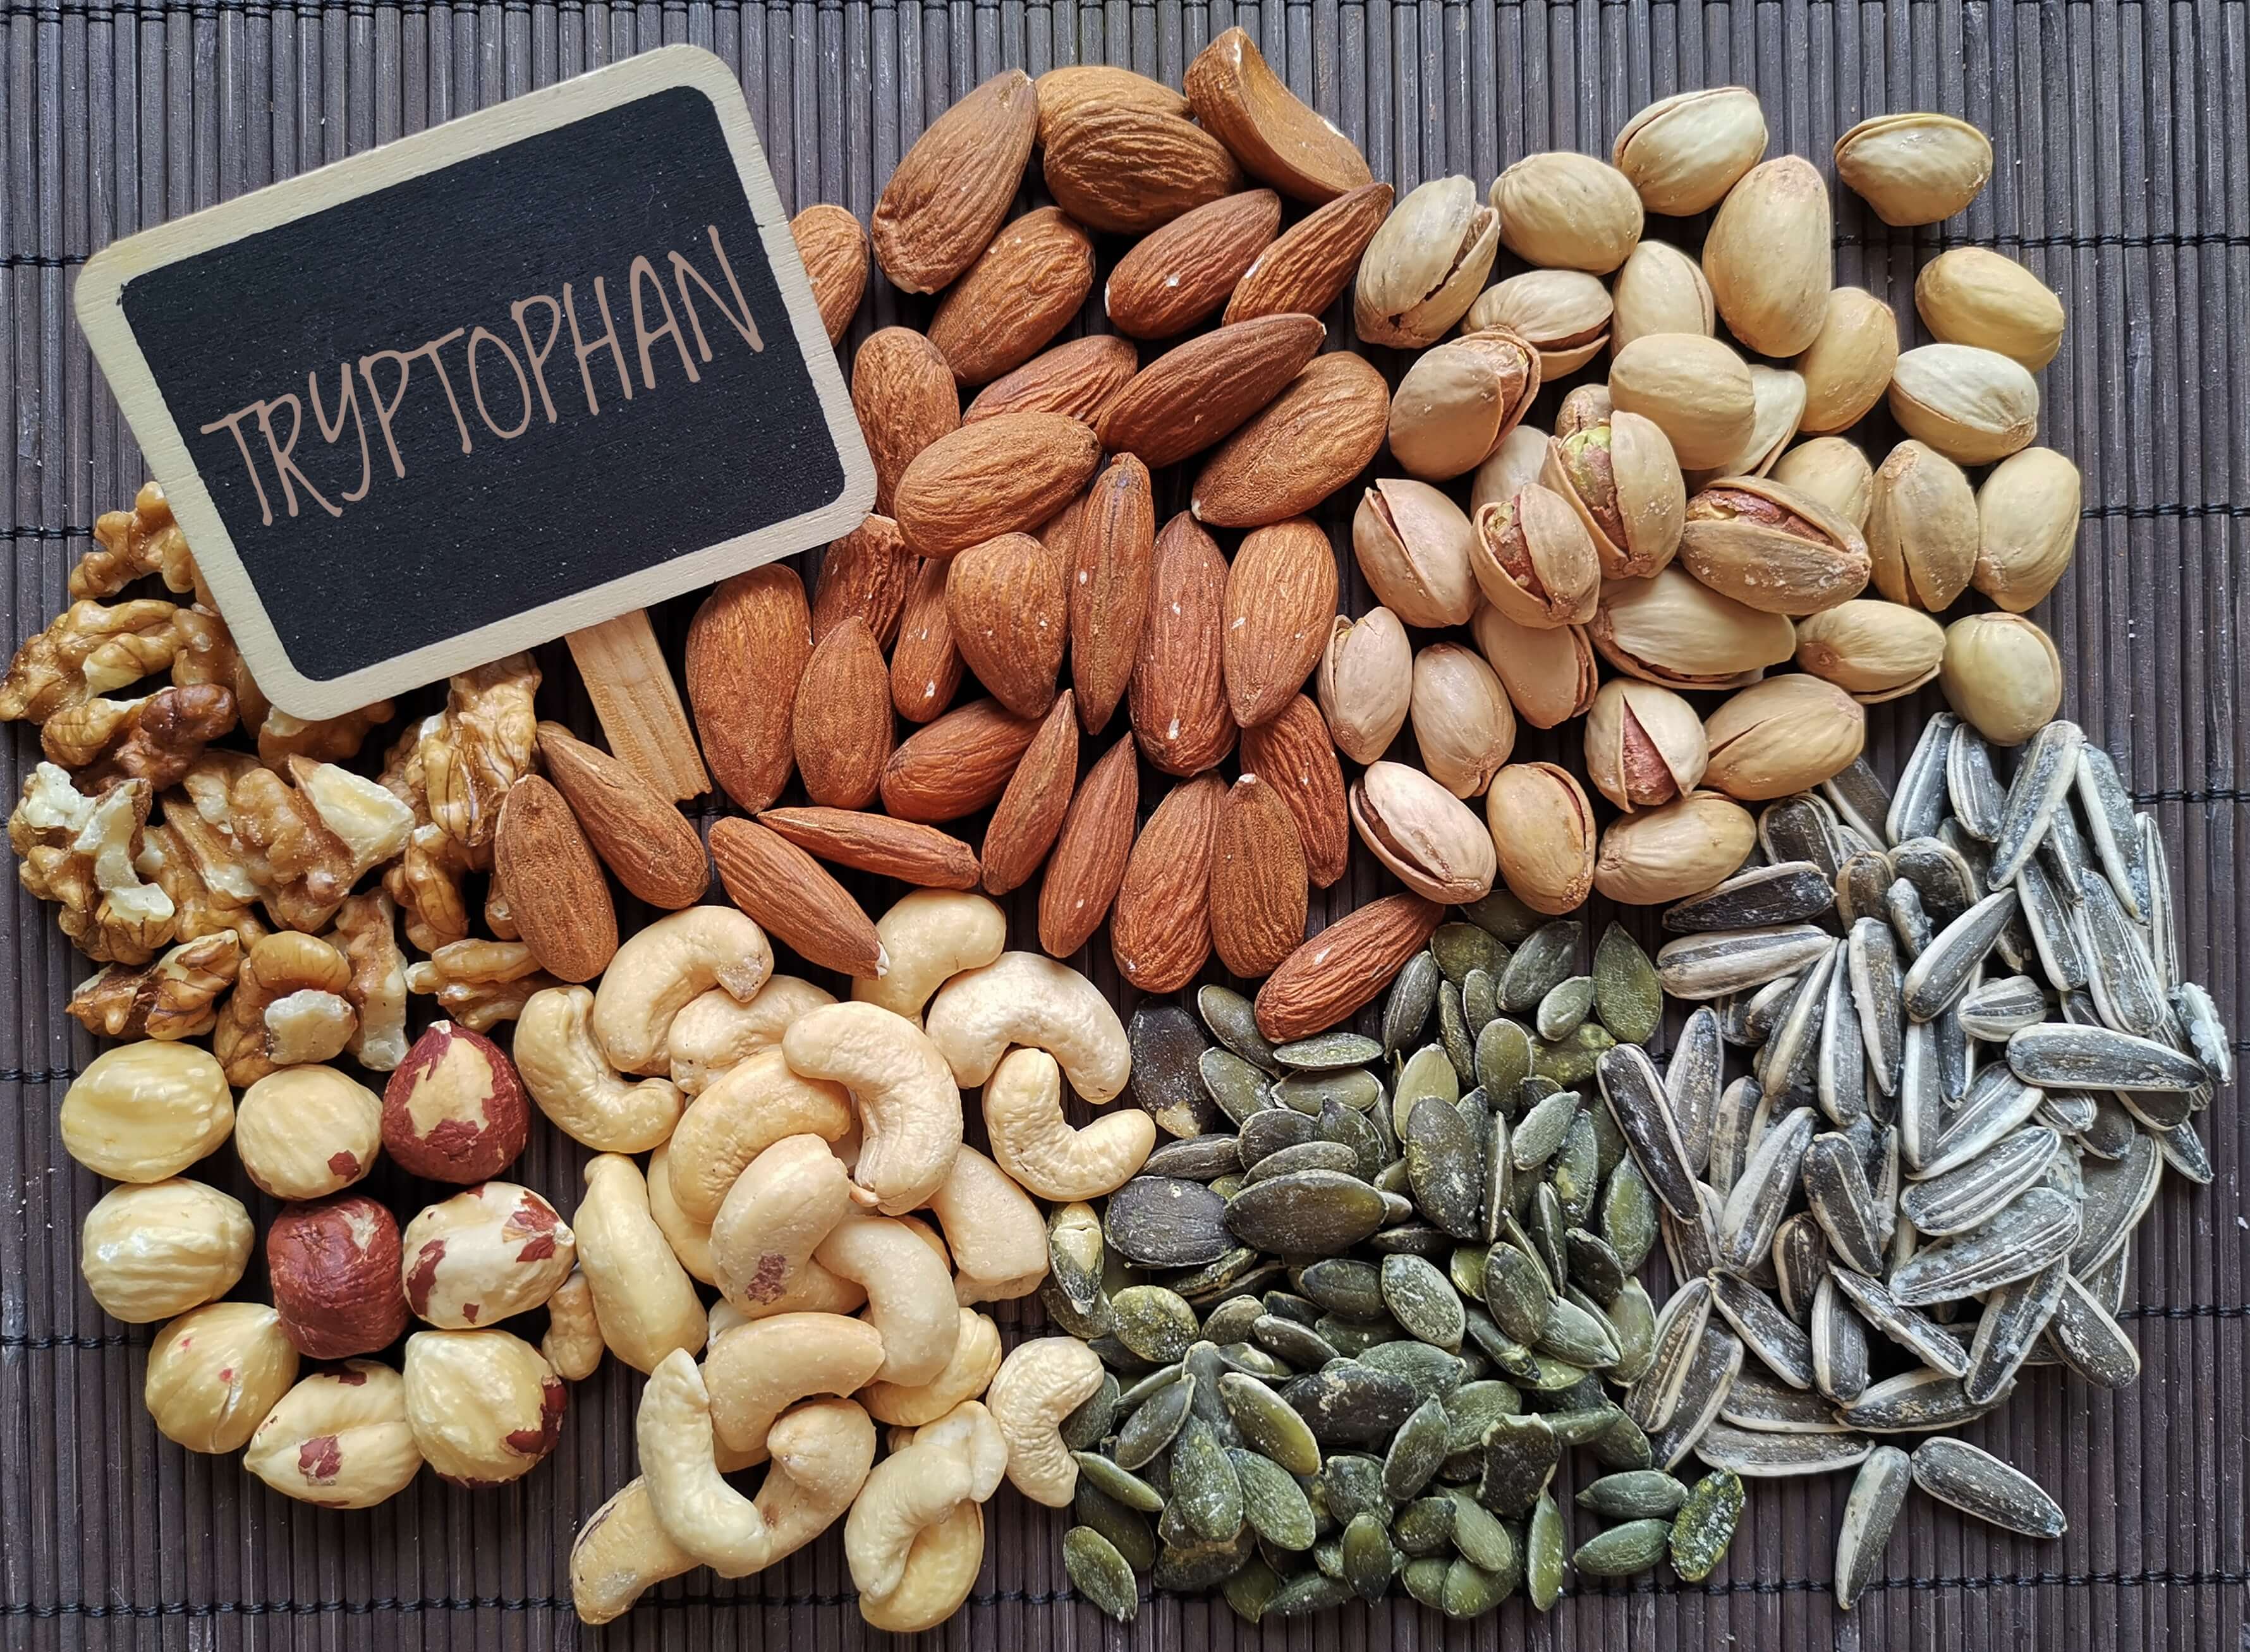 A platter of nuts and seeds which are natural sources of the sleep supplement Tryptophan